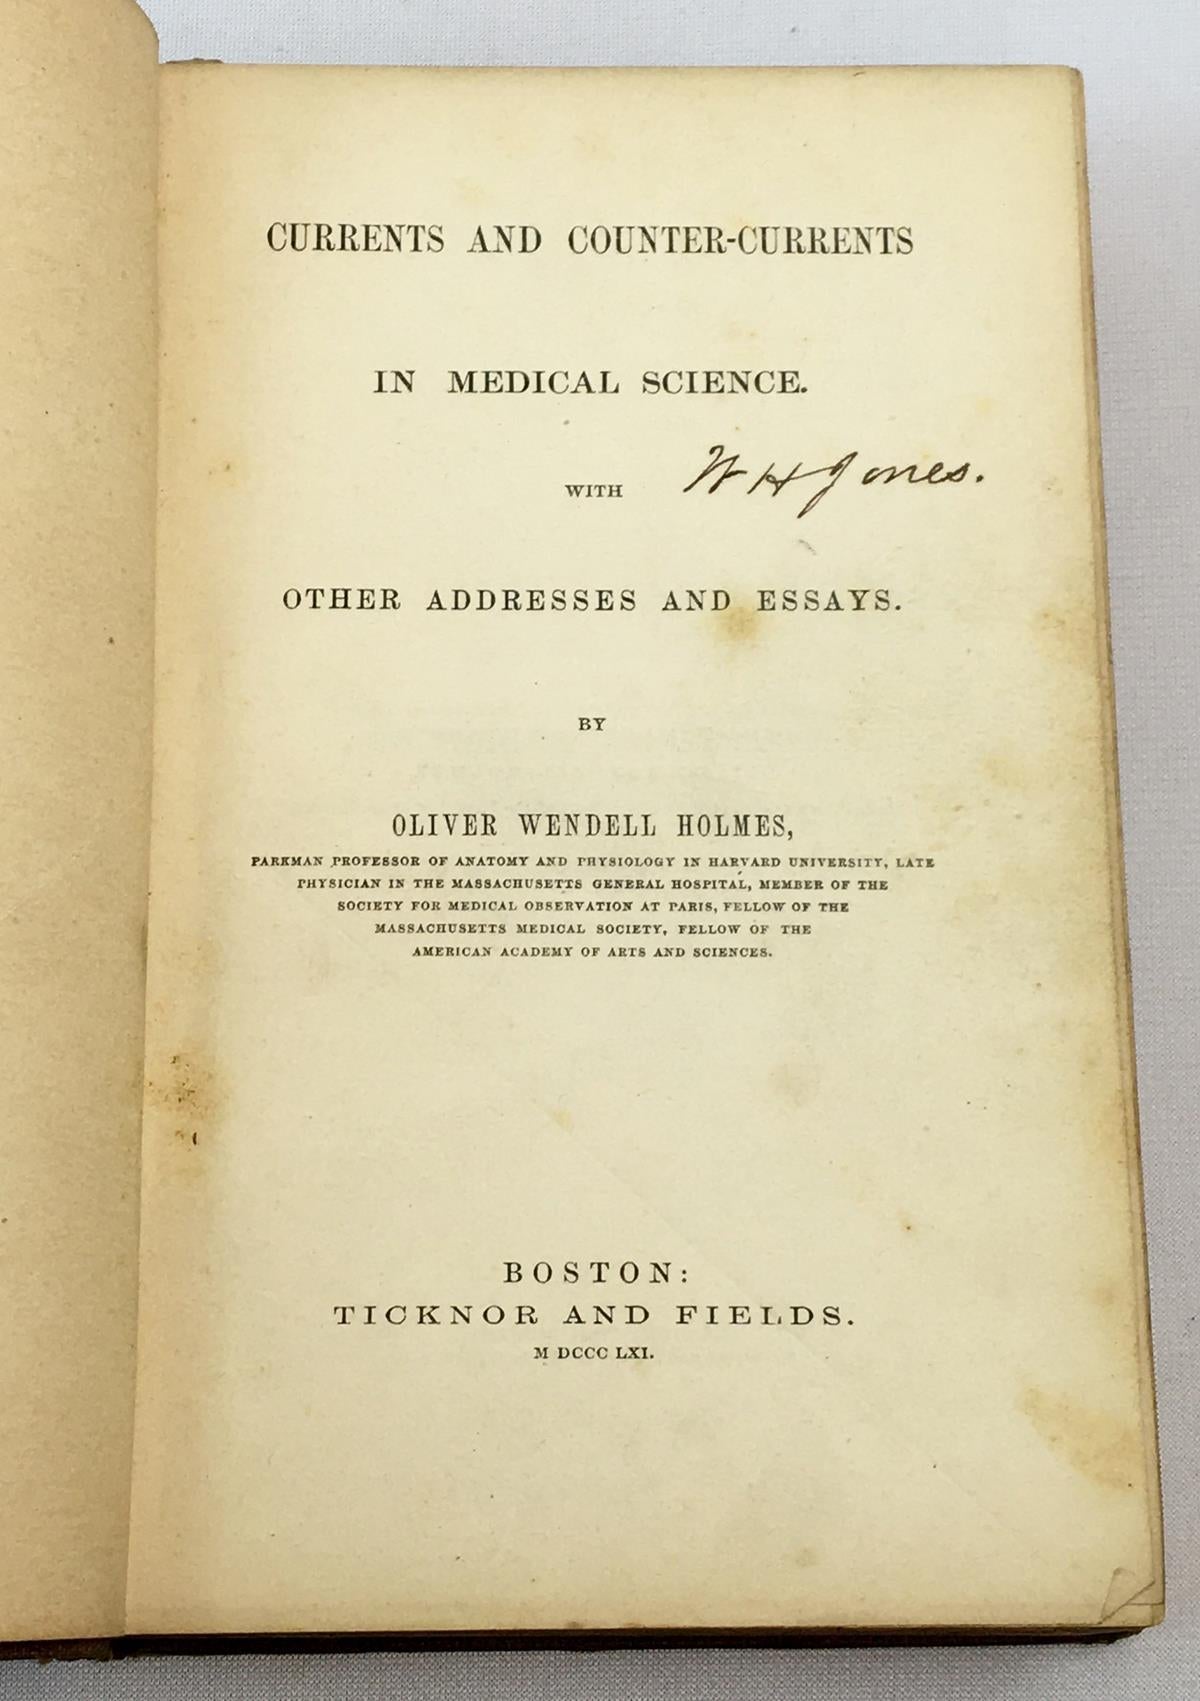 1861 Currents and Counter-Currents in Medical Science with Other Addresses and Essay by Oliver Wendell Holmes FIRST EDITION